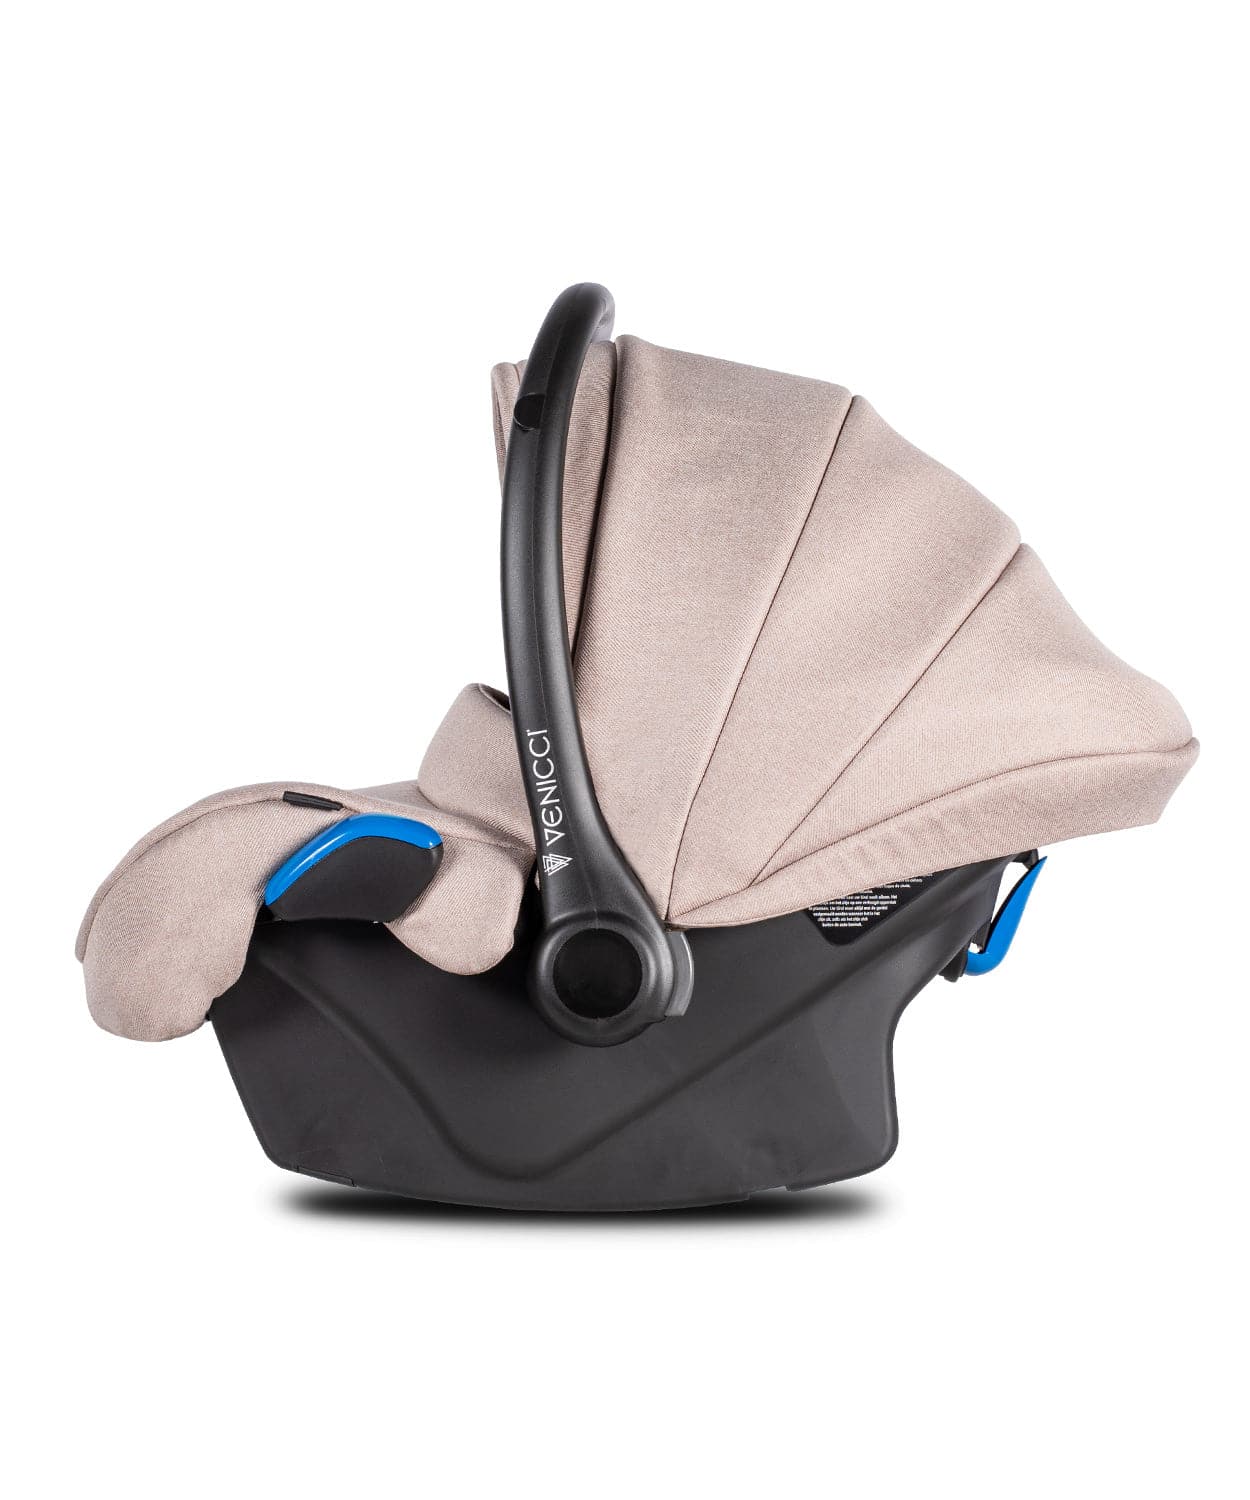 Venicci Tinum 2.0 3-in-1 Travel System - Sabbia -  | For Your Little One